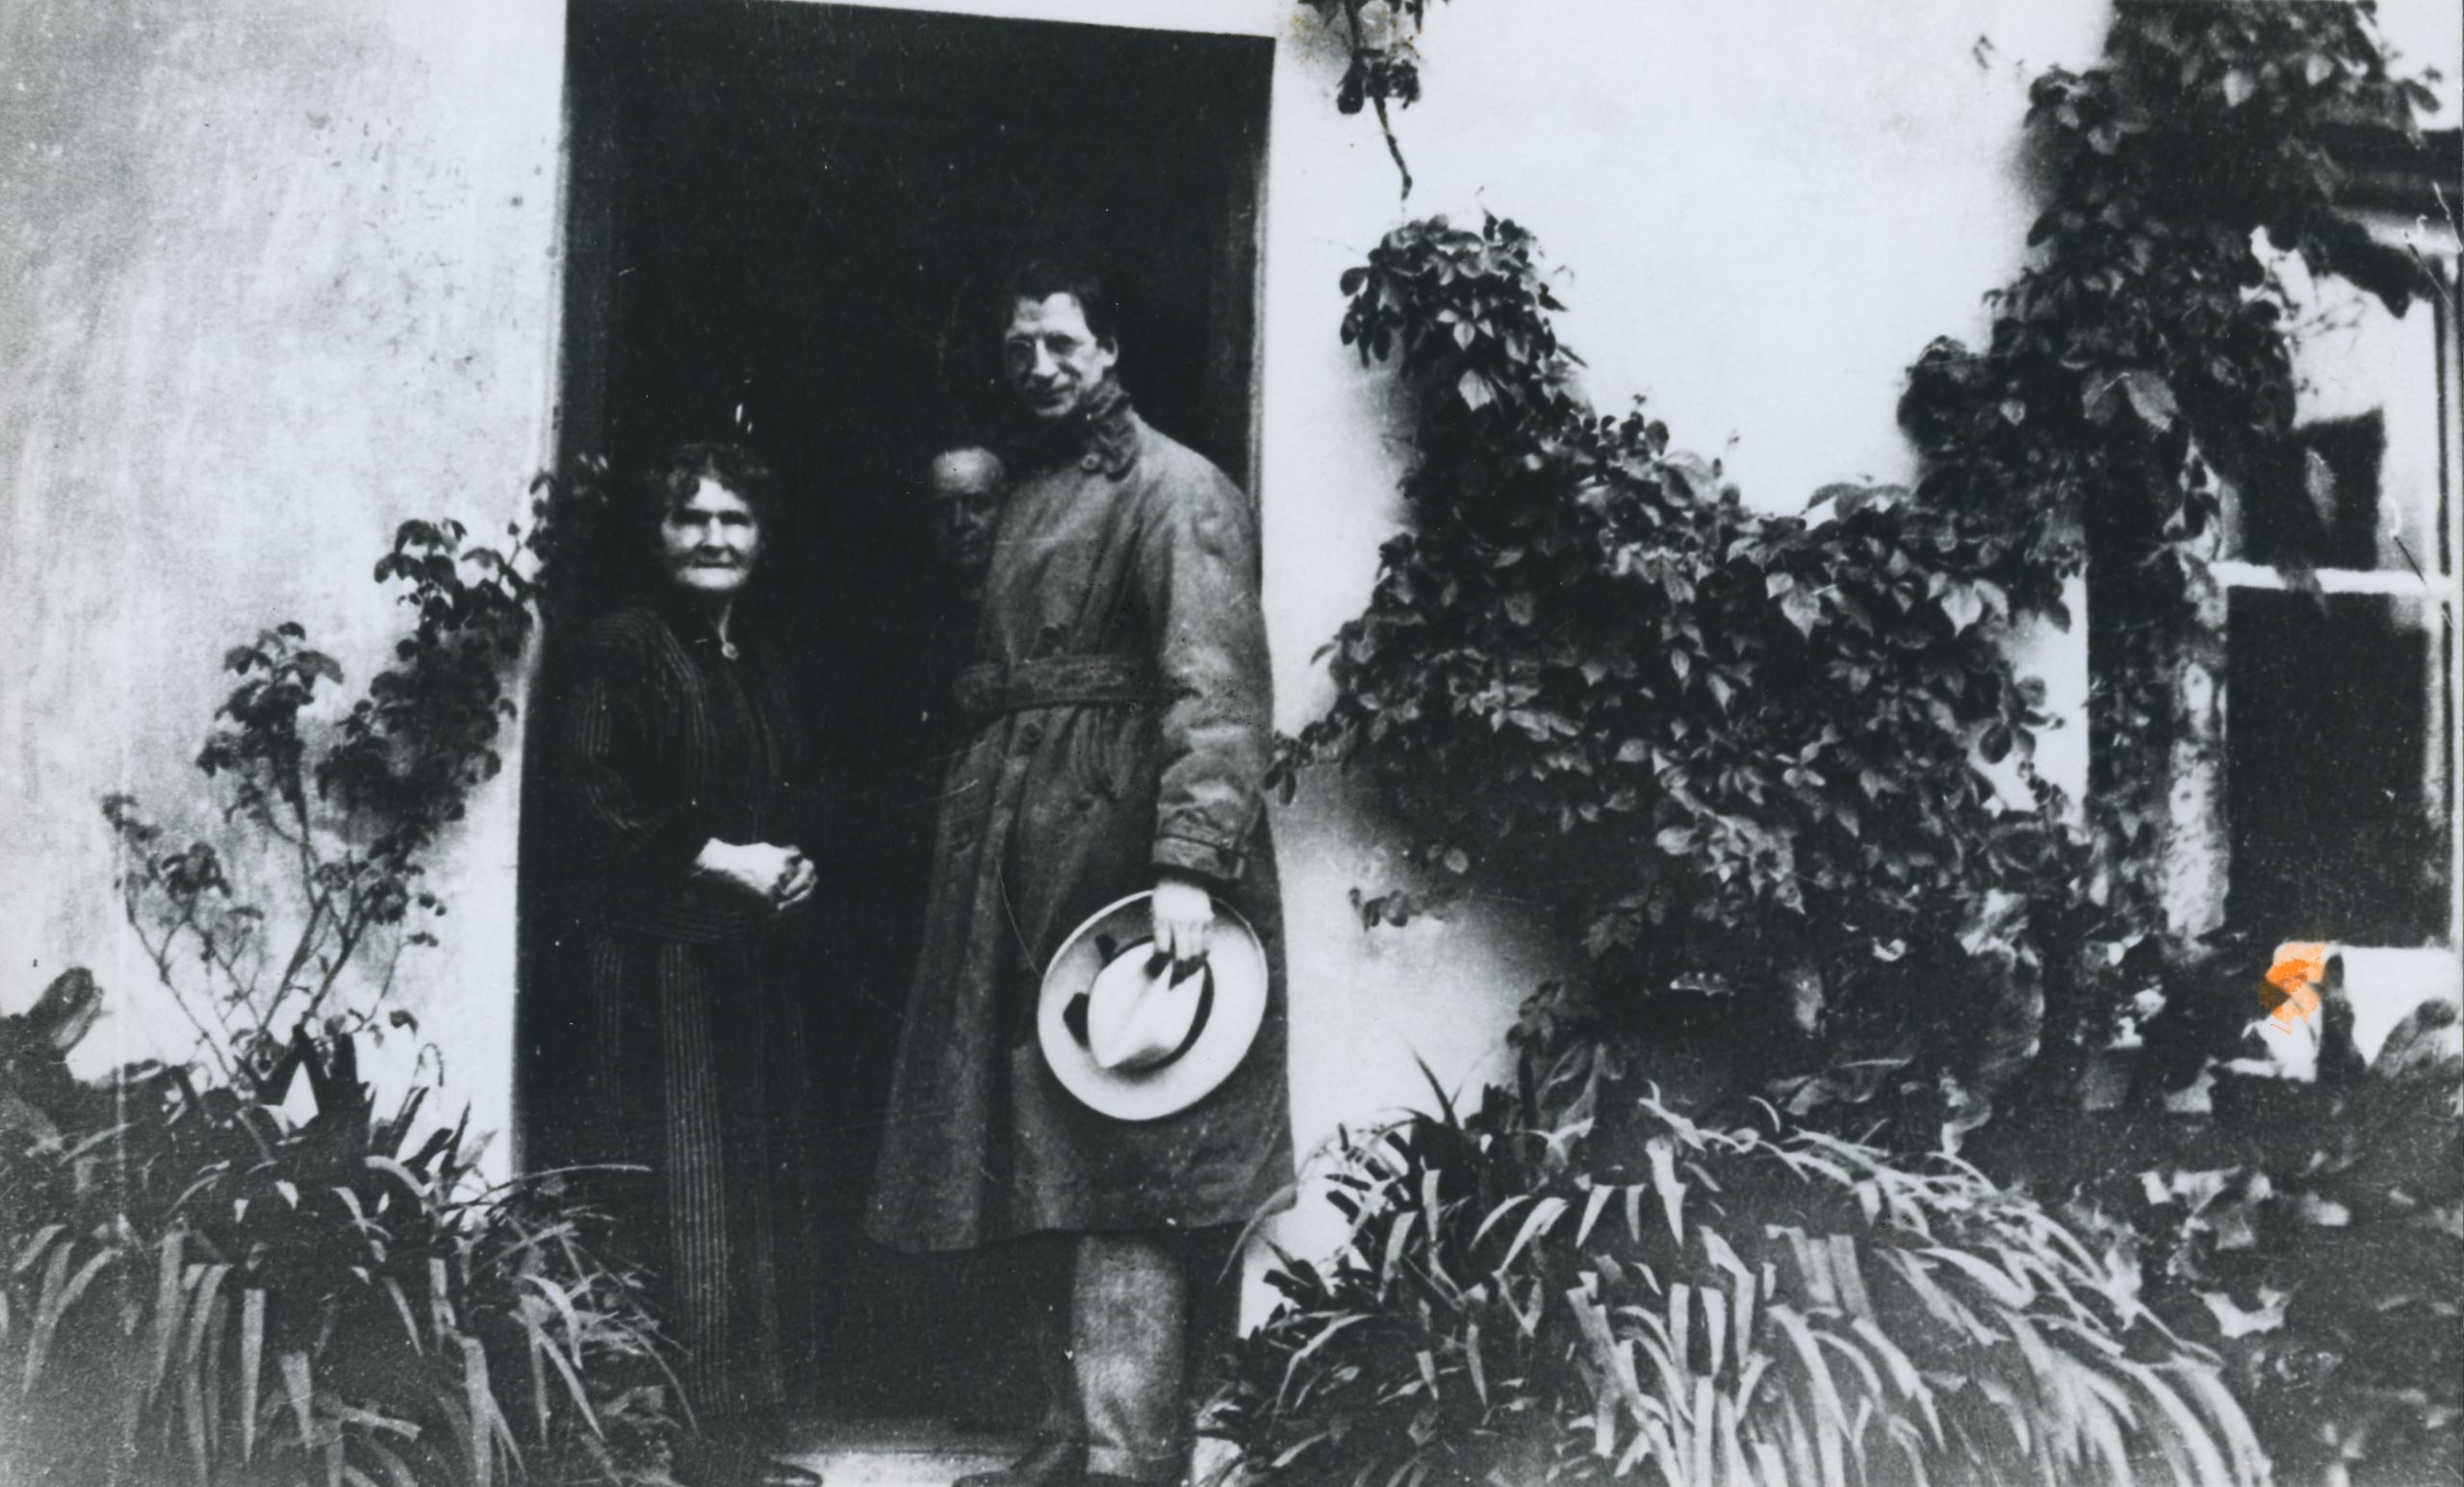 Tessie’s mother, Marianne O’Connell (née O’Sullivan) 1858-1938 with Eamon de Valera 1882-1975 at the door of her home in Caherdaniel, County Kerry. KMGLM.20PC-1B52-21